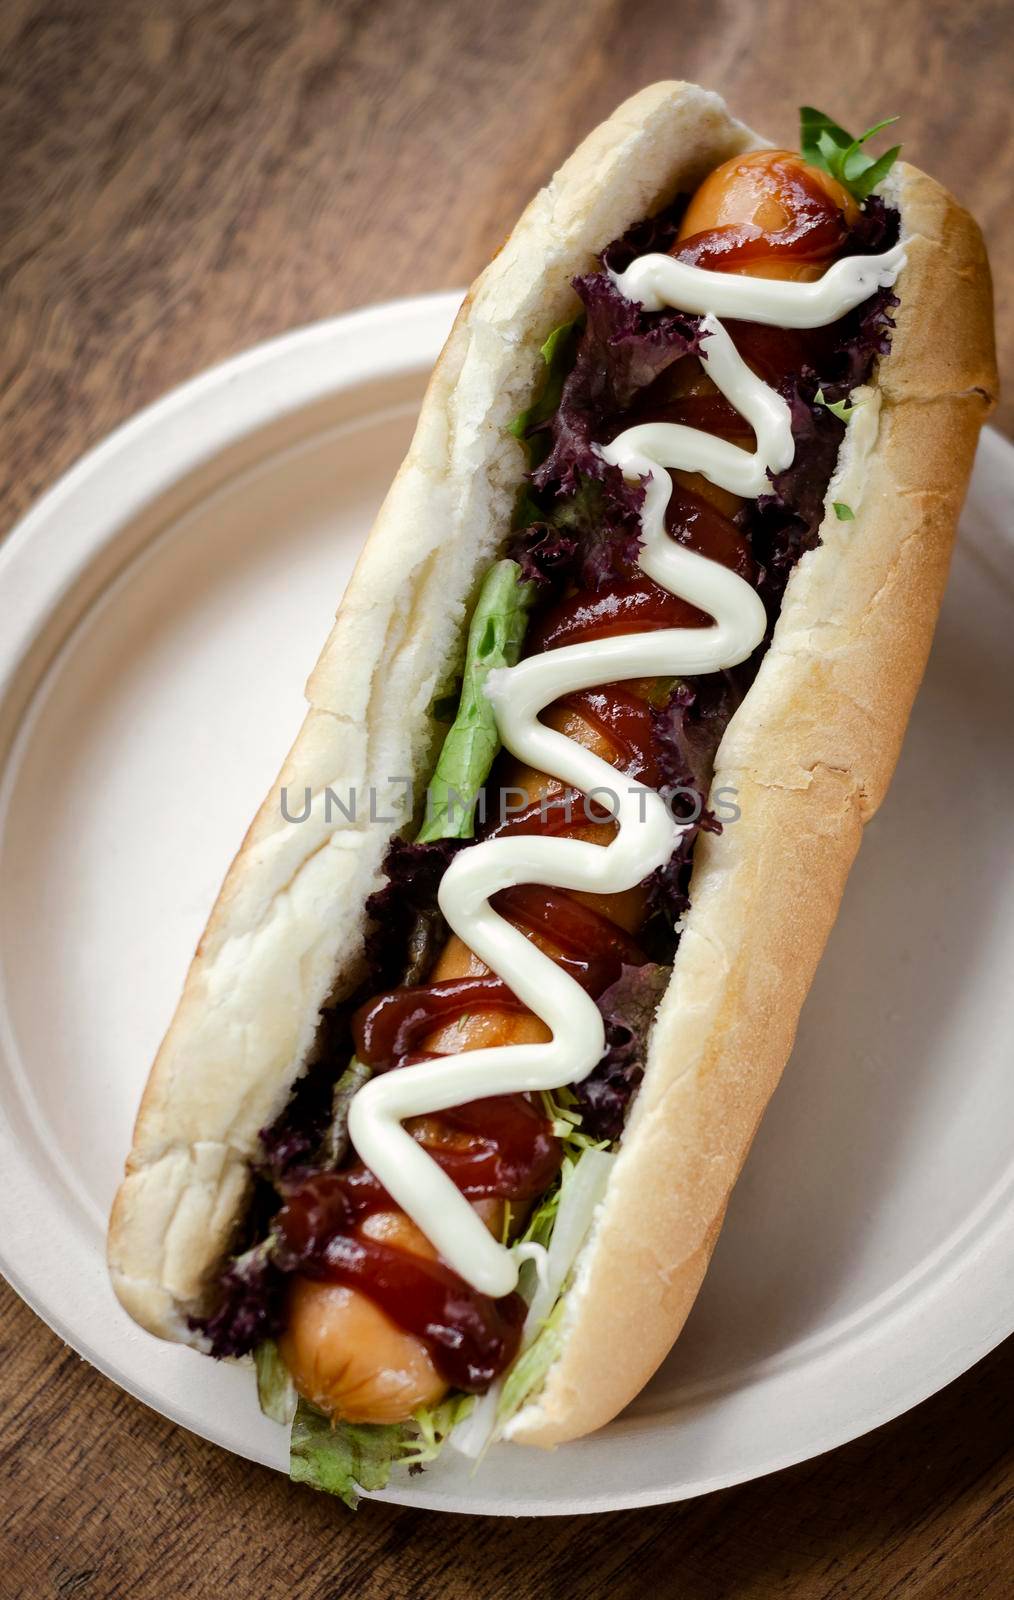 classic hot dog with frankfurter sausage and sauces by jackmalipan